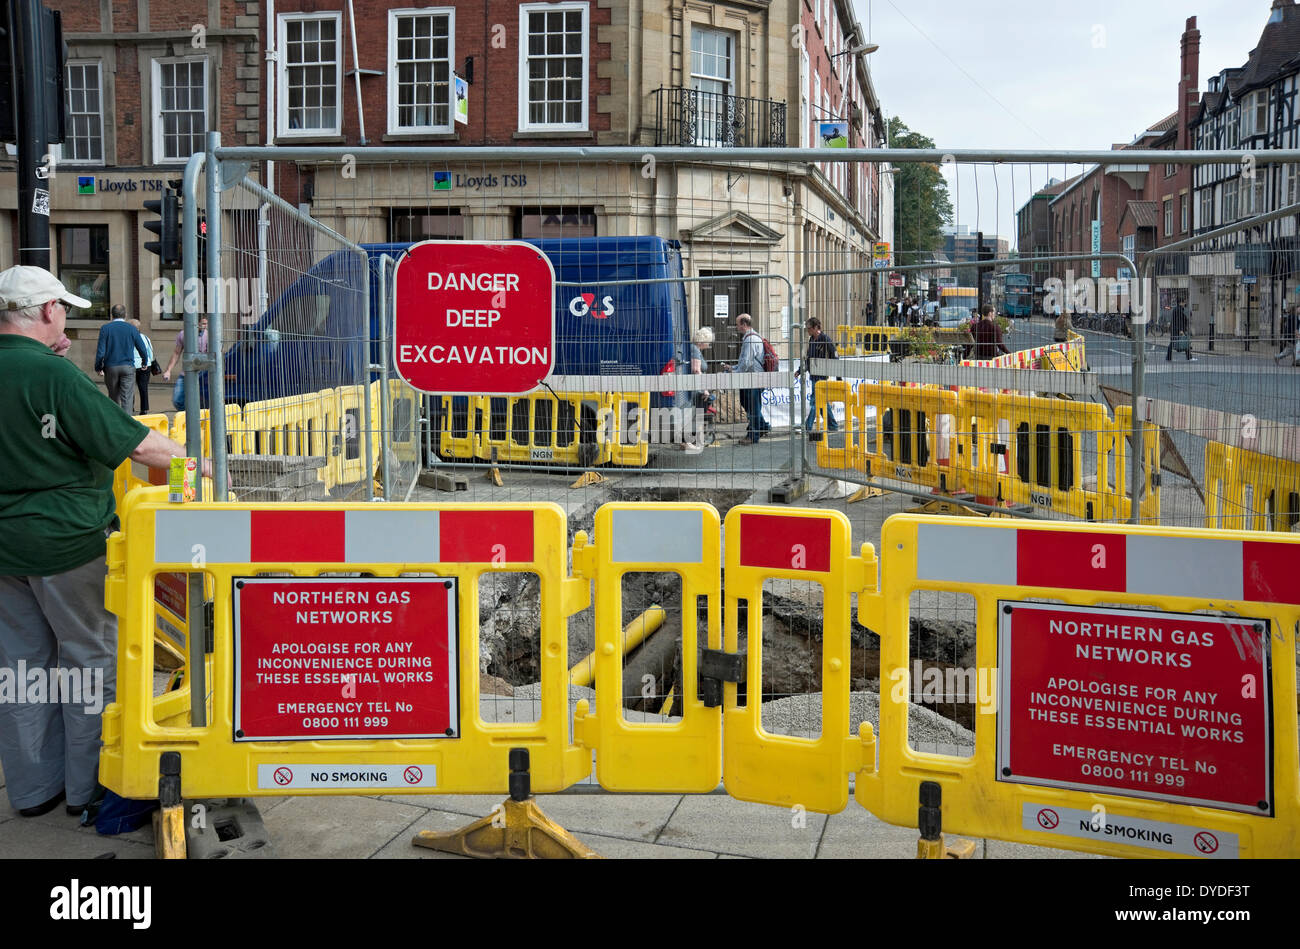 Northern Gas Networks replacing old gas pipes in Piccadilly. Stock Photo